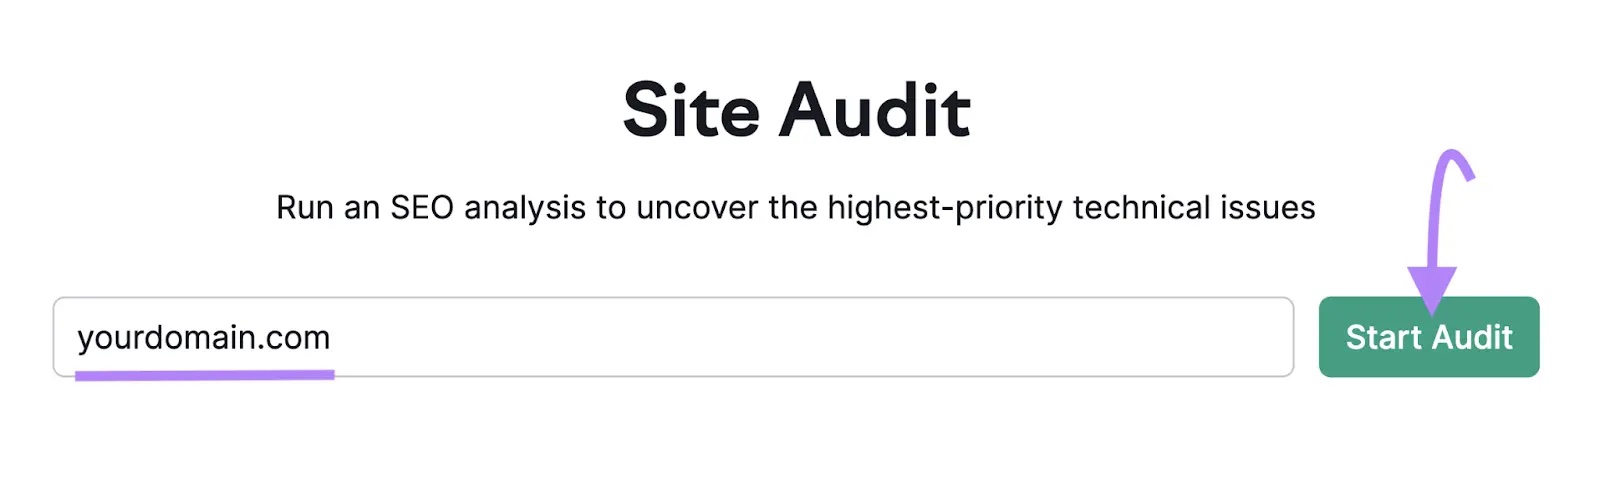 Site Audit interface with “yourdomain.com” entered.